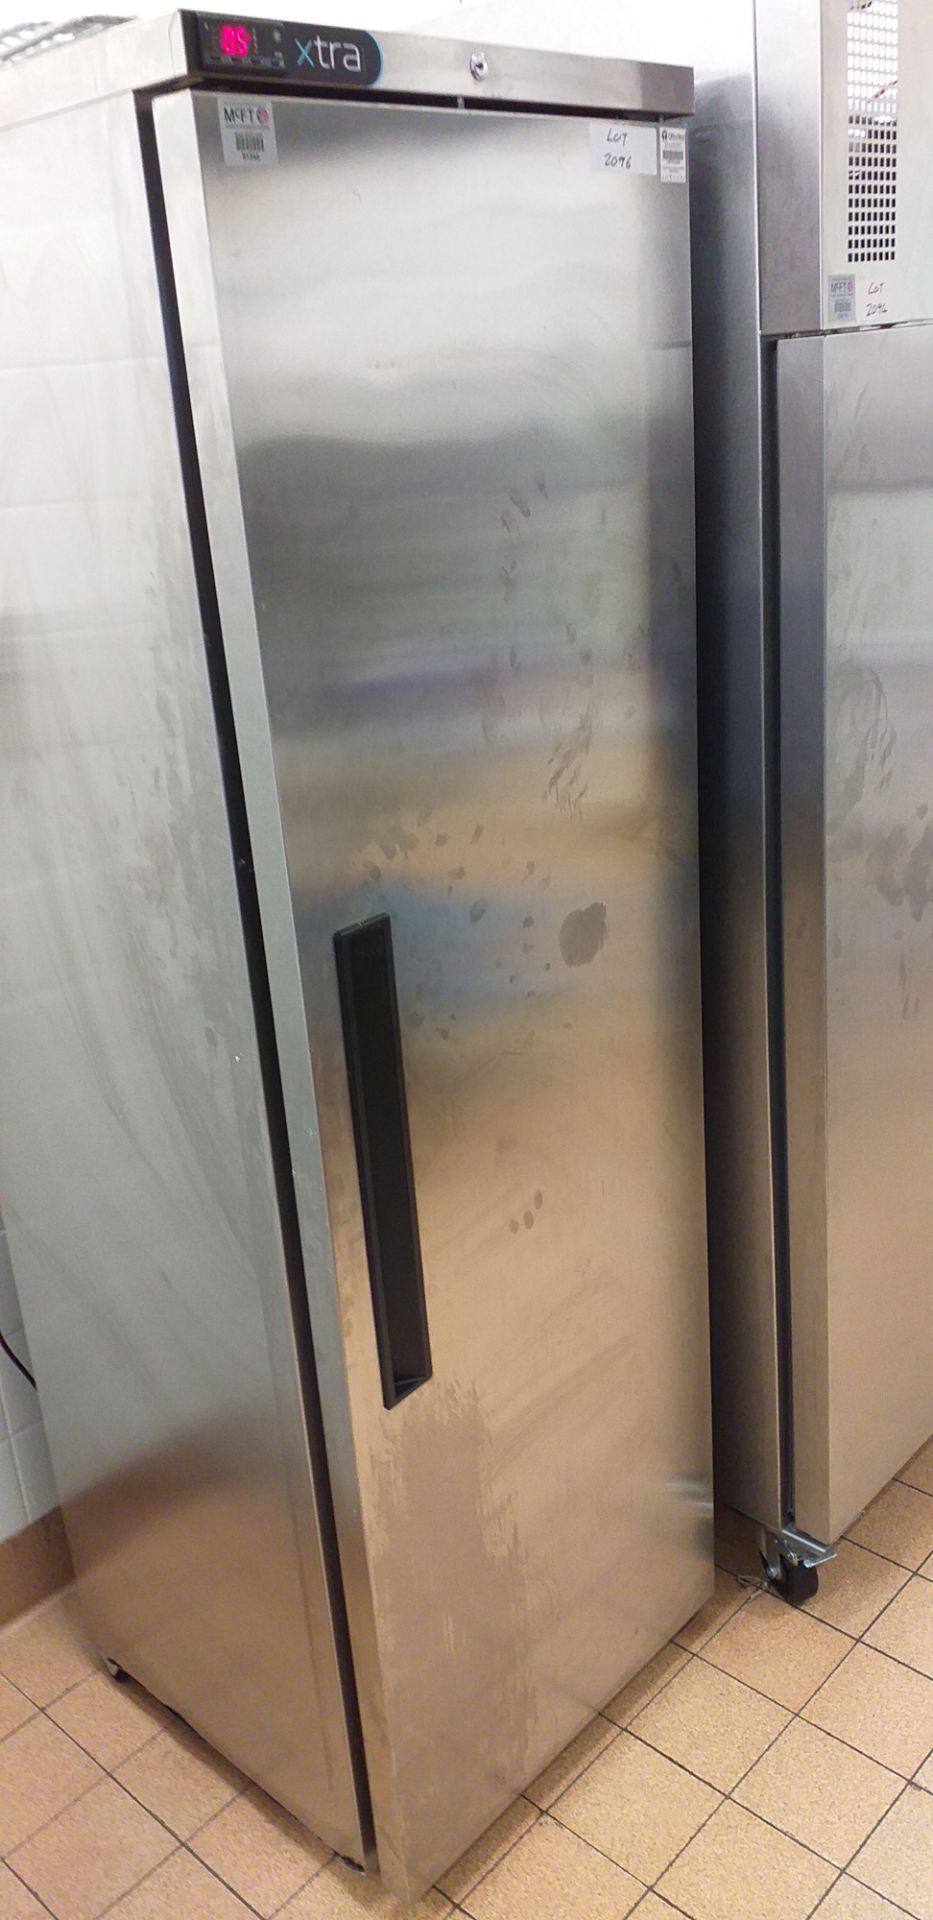 XTRA REFRIGERATOR [RIGGING FEES FOR LOT #2096 - £100 PLUS APPLICABLE TAXES]